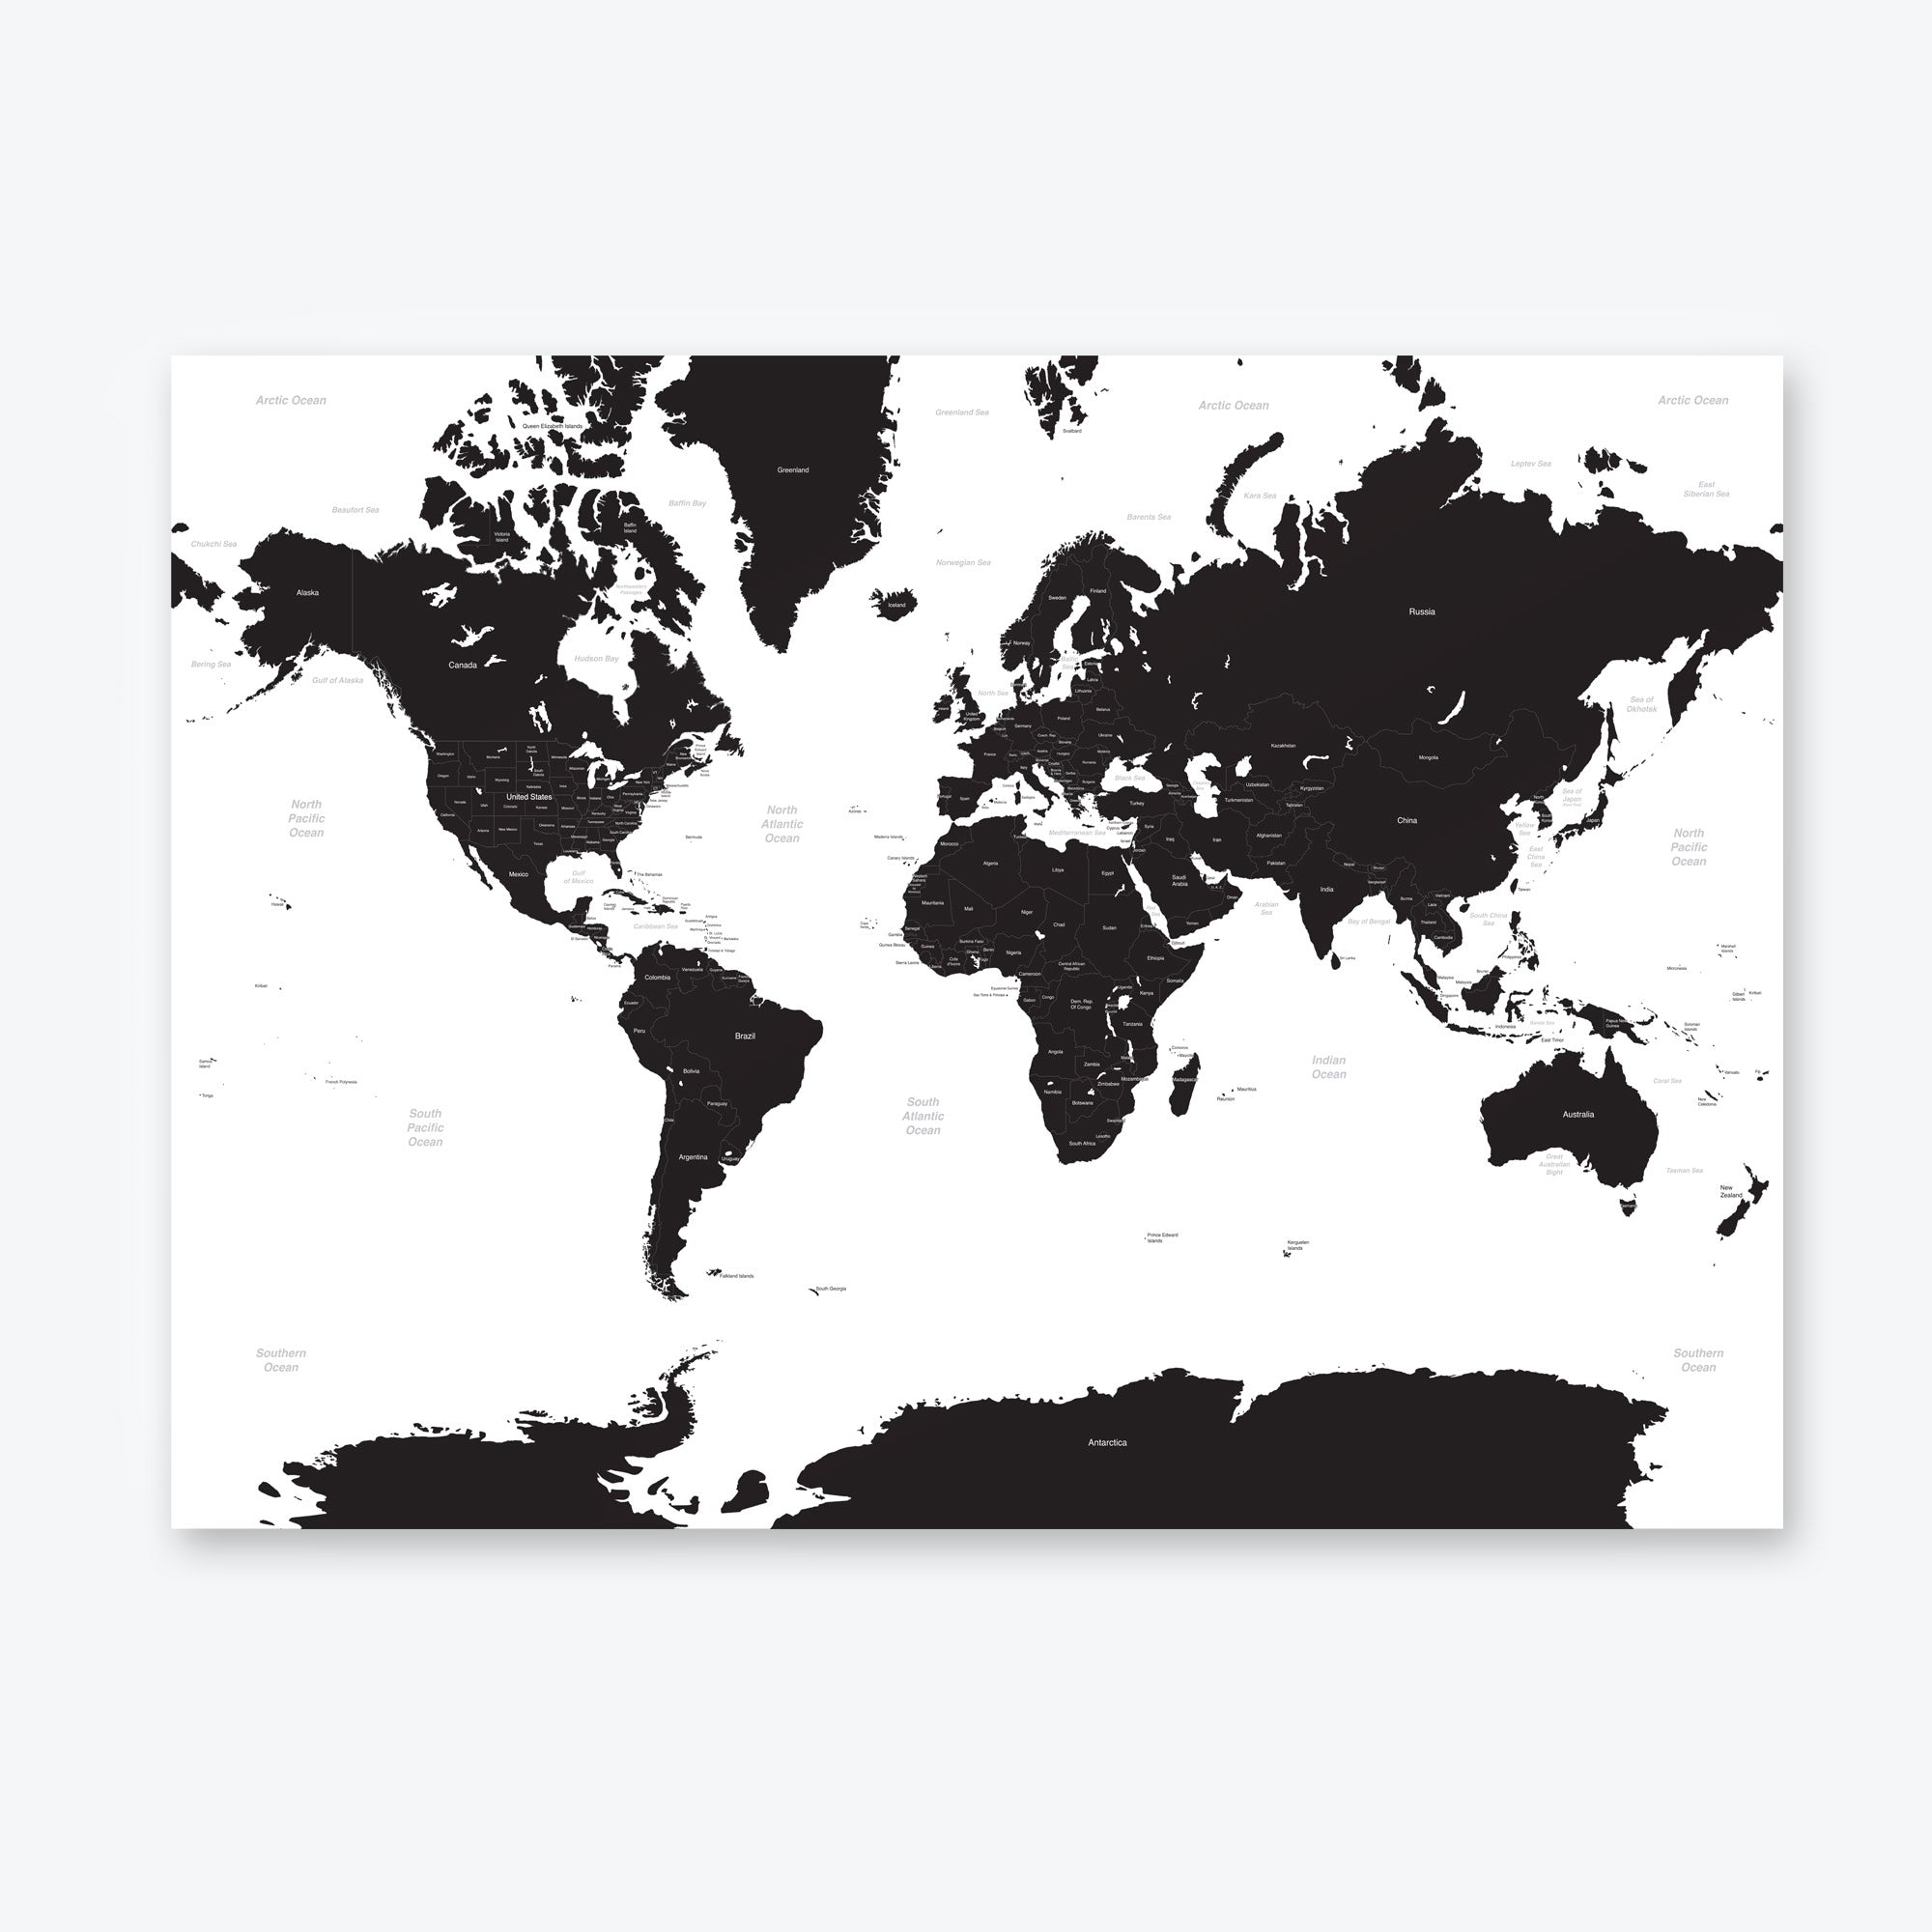 White Sea Black Countries Map of the World